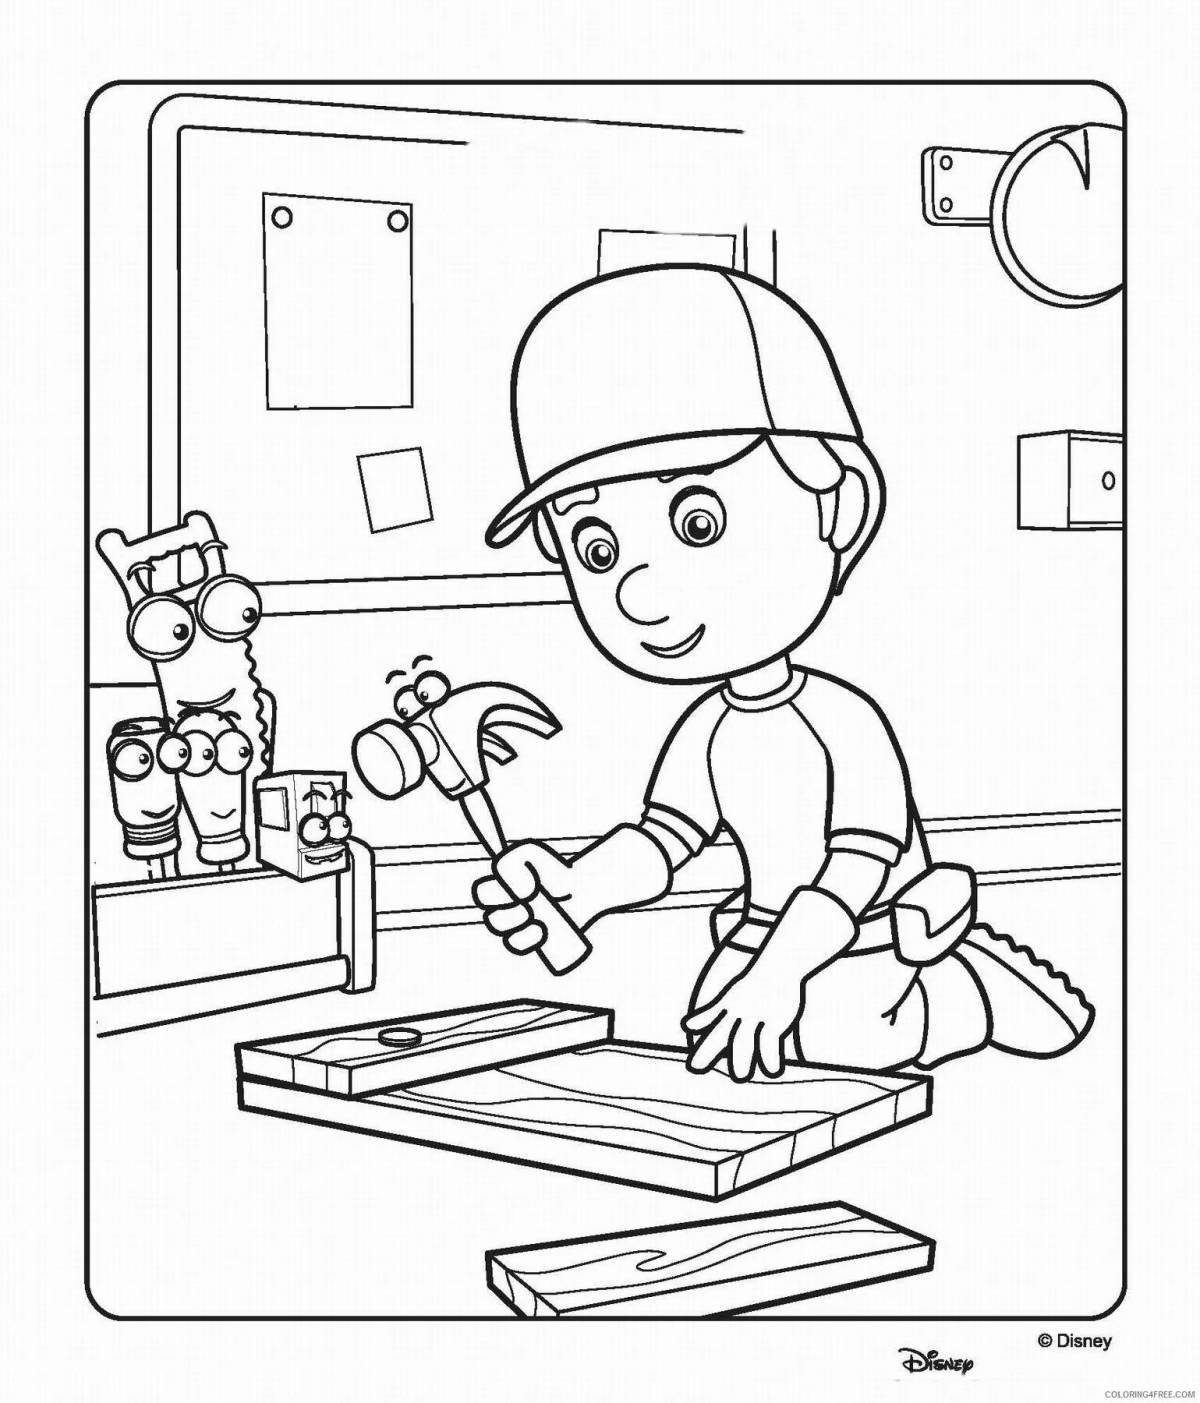 Occupational safety and health colorful coloring page